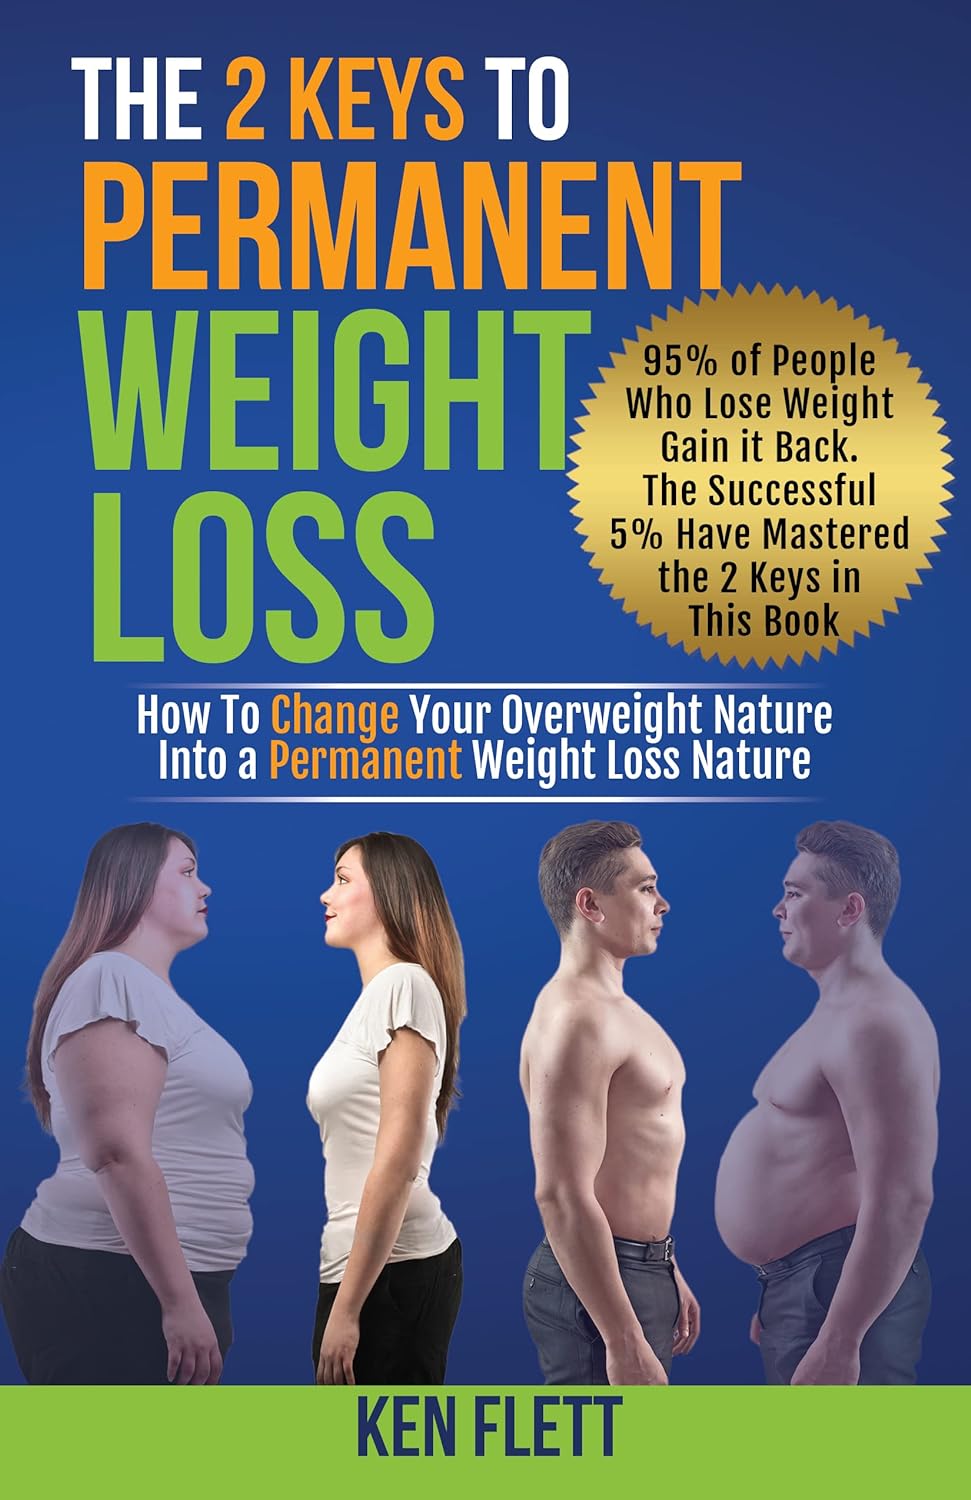 The 2 Keys To Permanent Weight Loss: Rewrite Your Weight Story, From Inner Struggles and Repeated Failures to Self-Discovery, Lasting Wellness and Joy